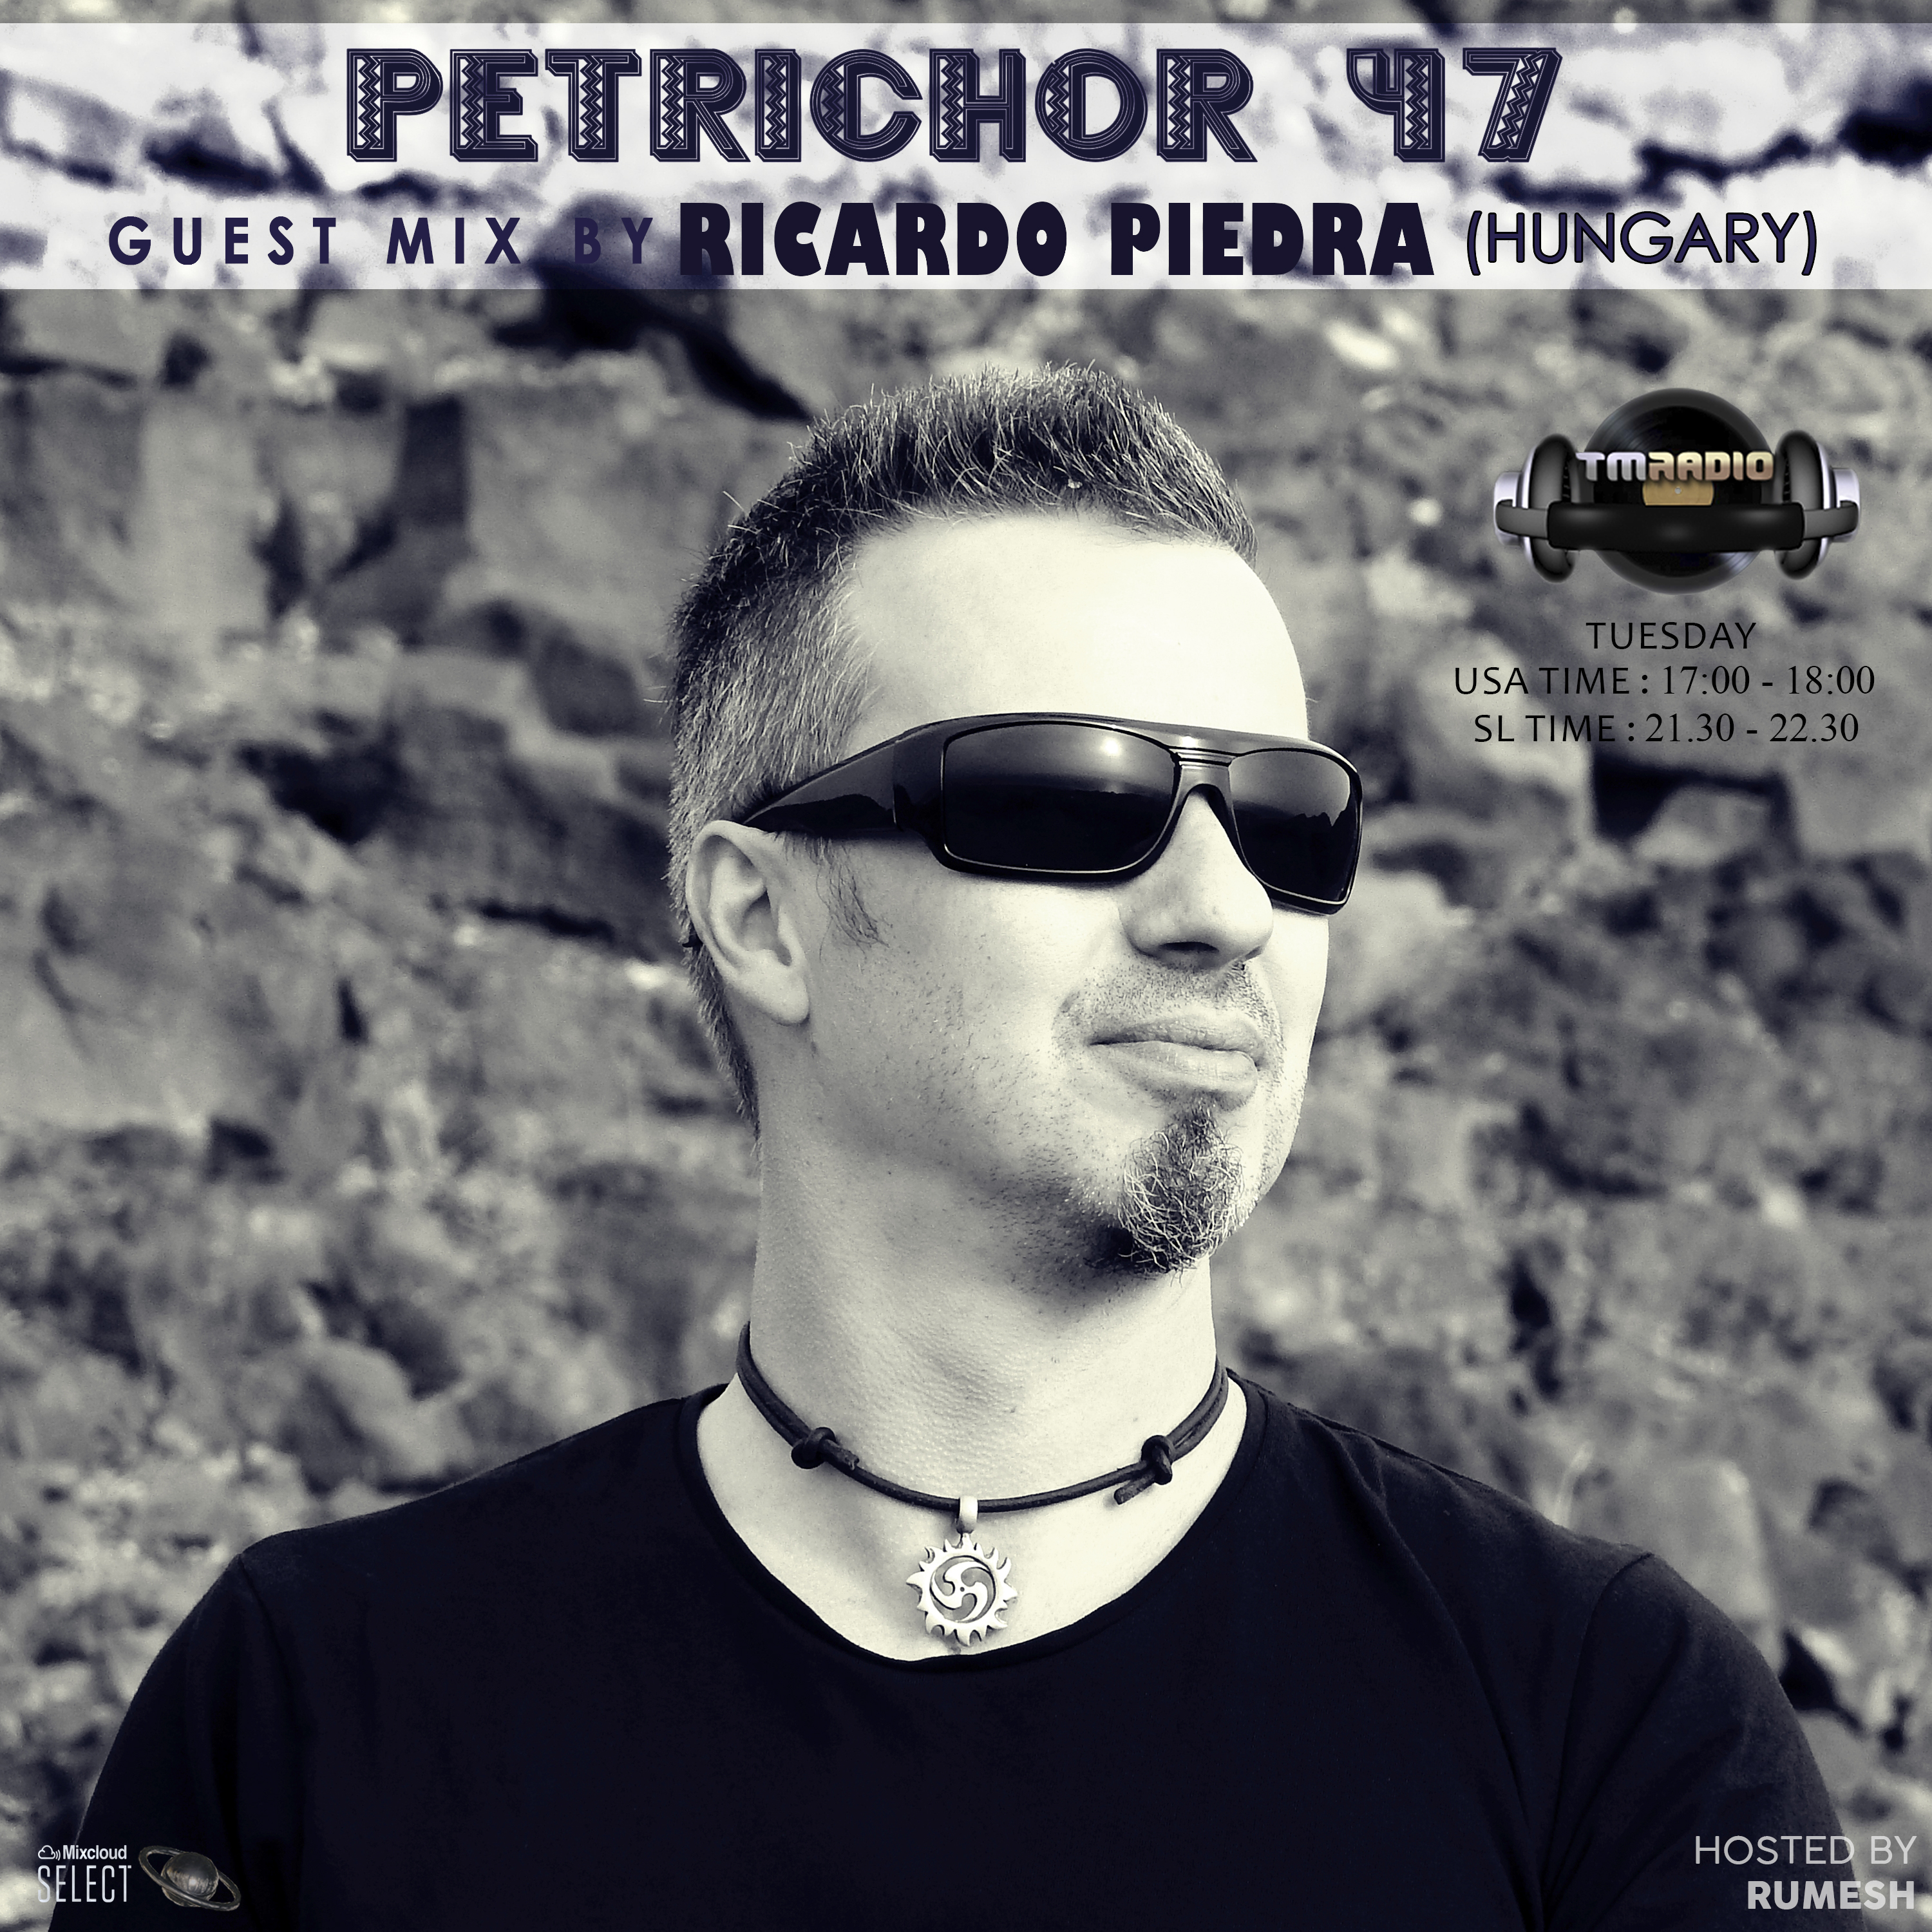 Petrichor 47 guest mix by Ricardo Piedra (Hungary) (from October 1st, 2019)